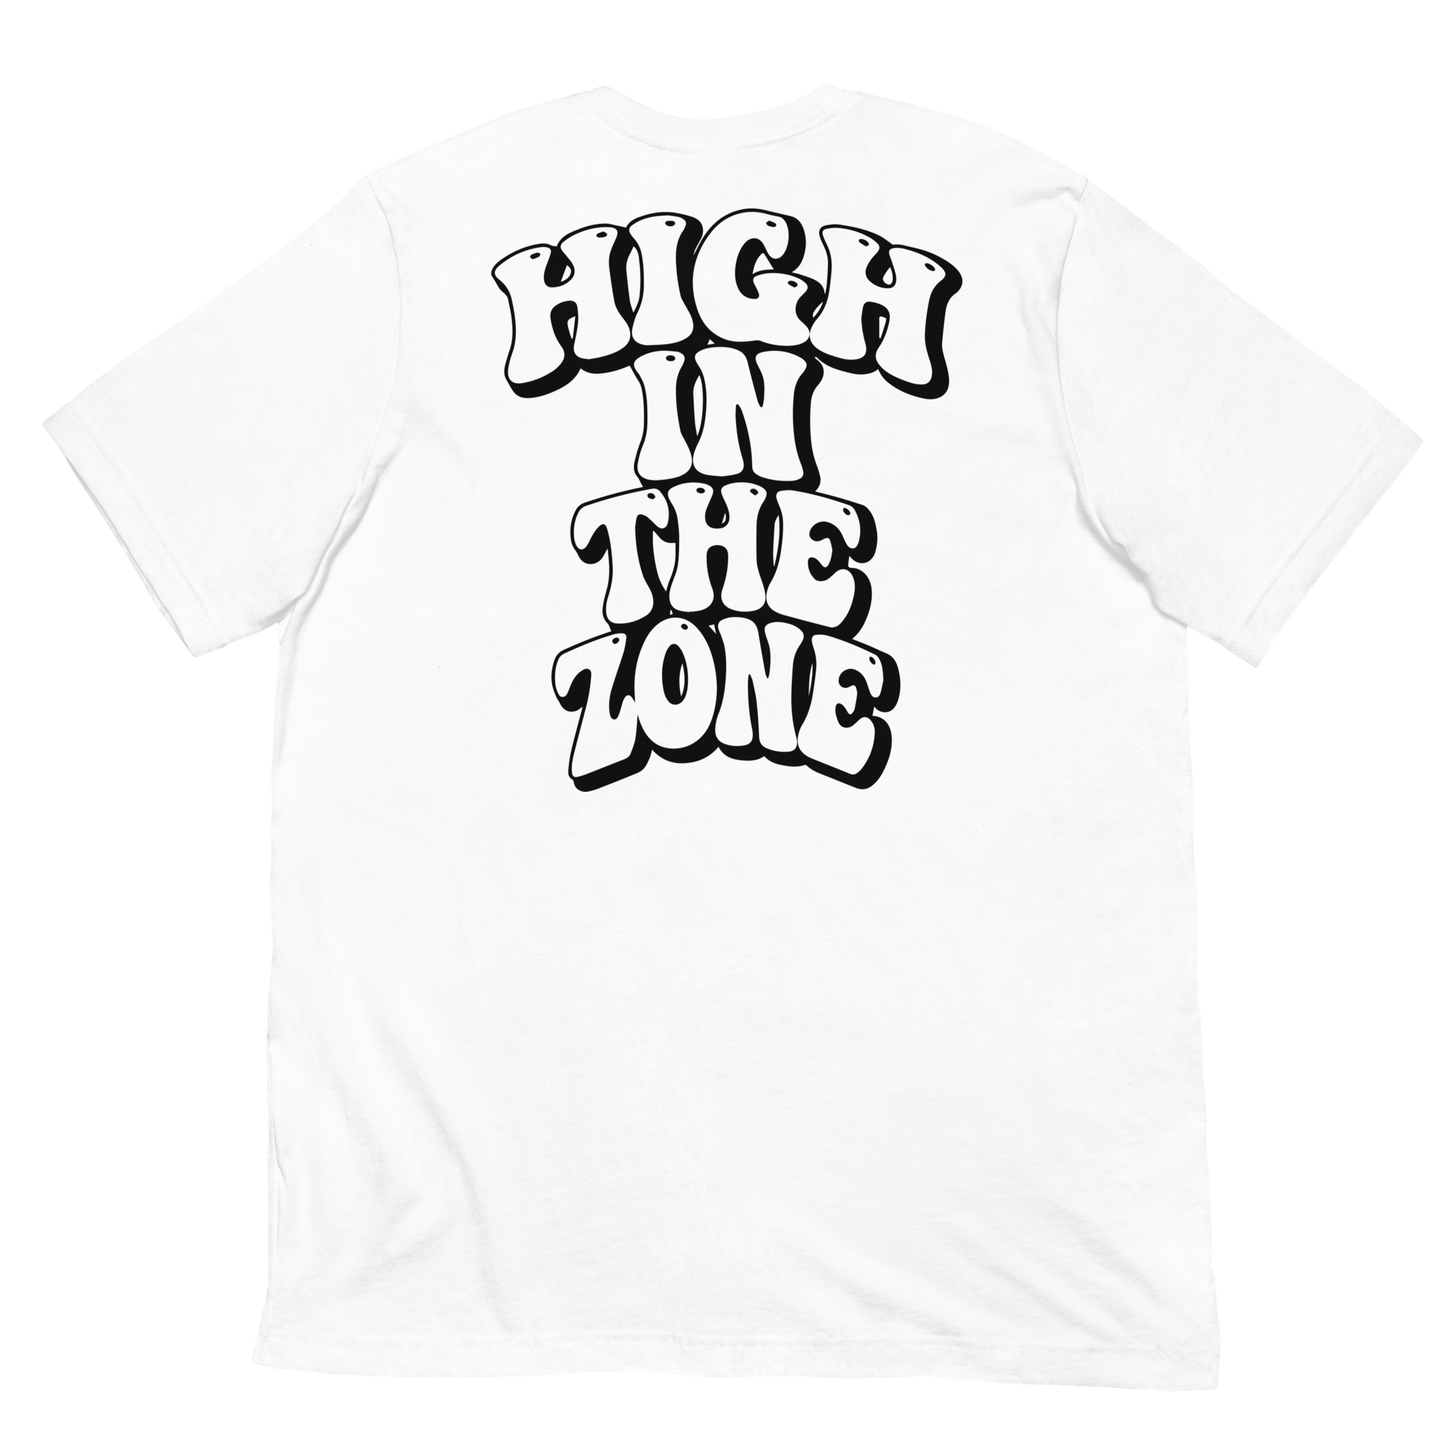 High in the Zone Logo Tee